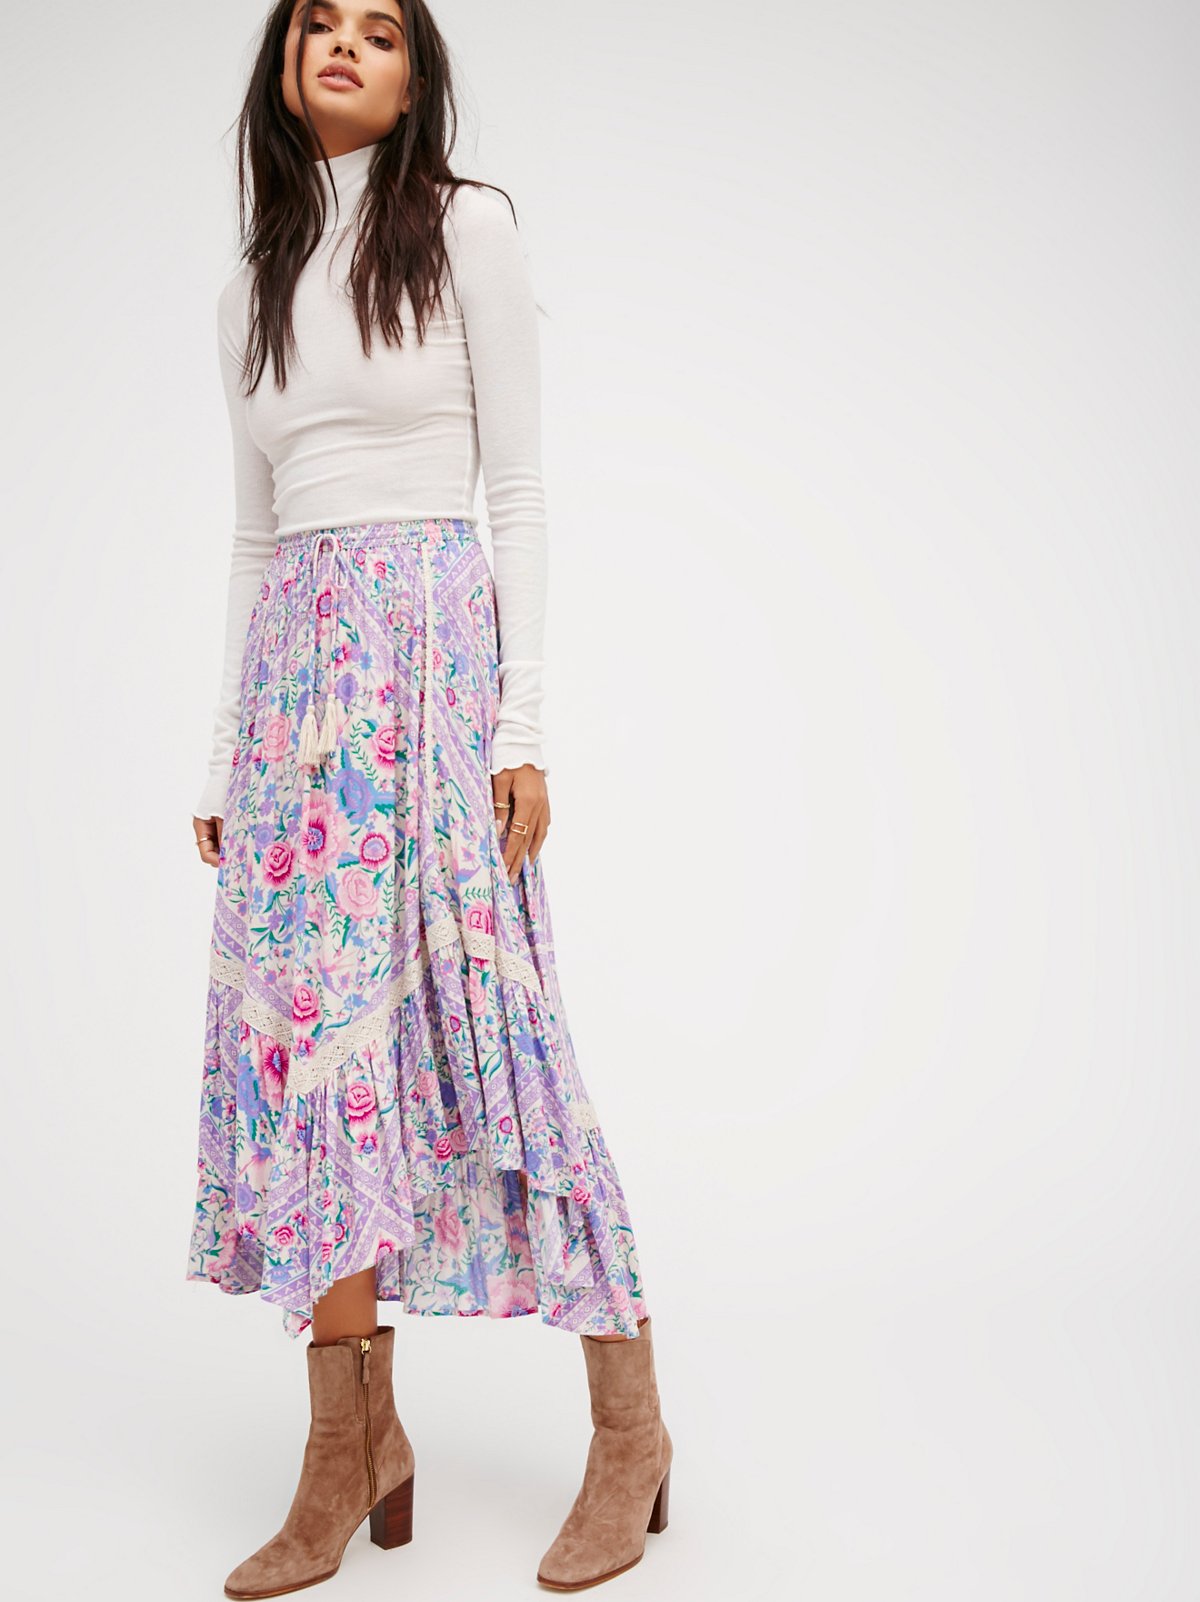 Spell & the Gypsy Collective Babushka Scarf Skirt at Free People ...